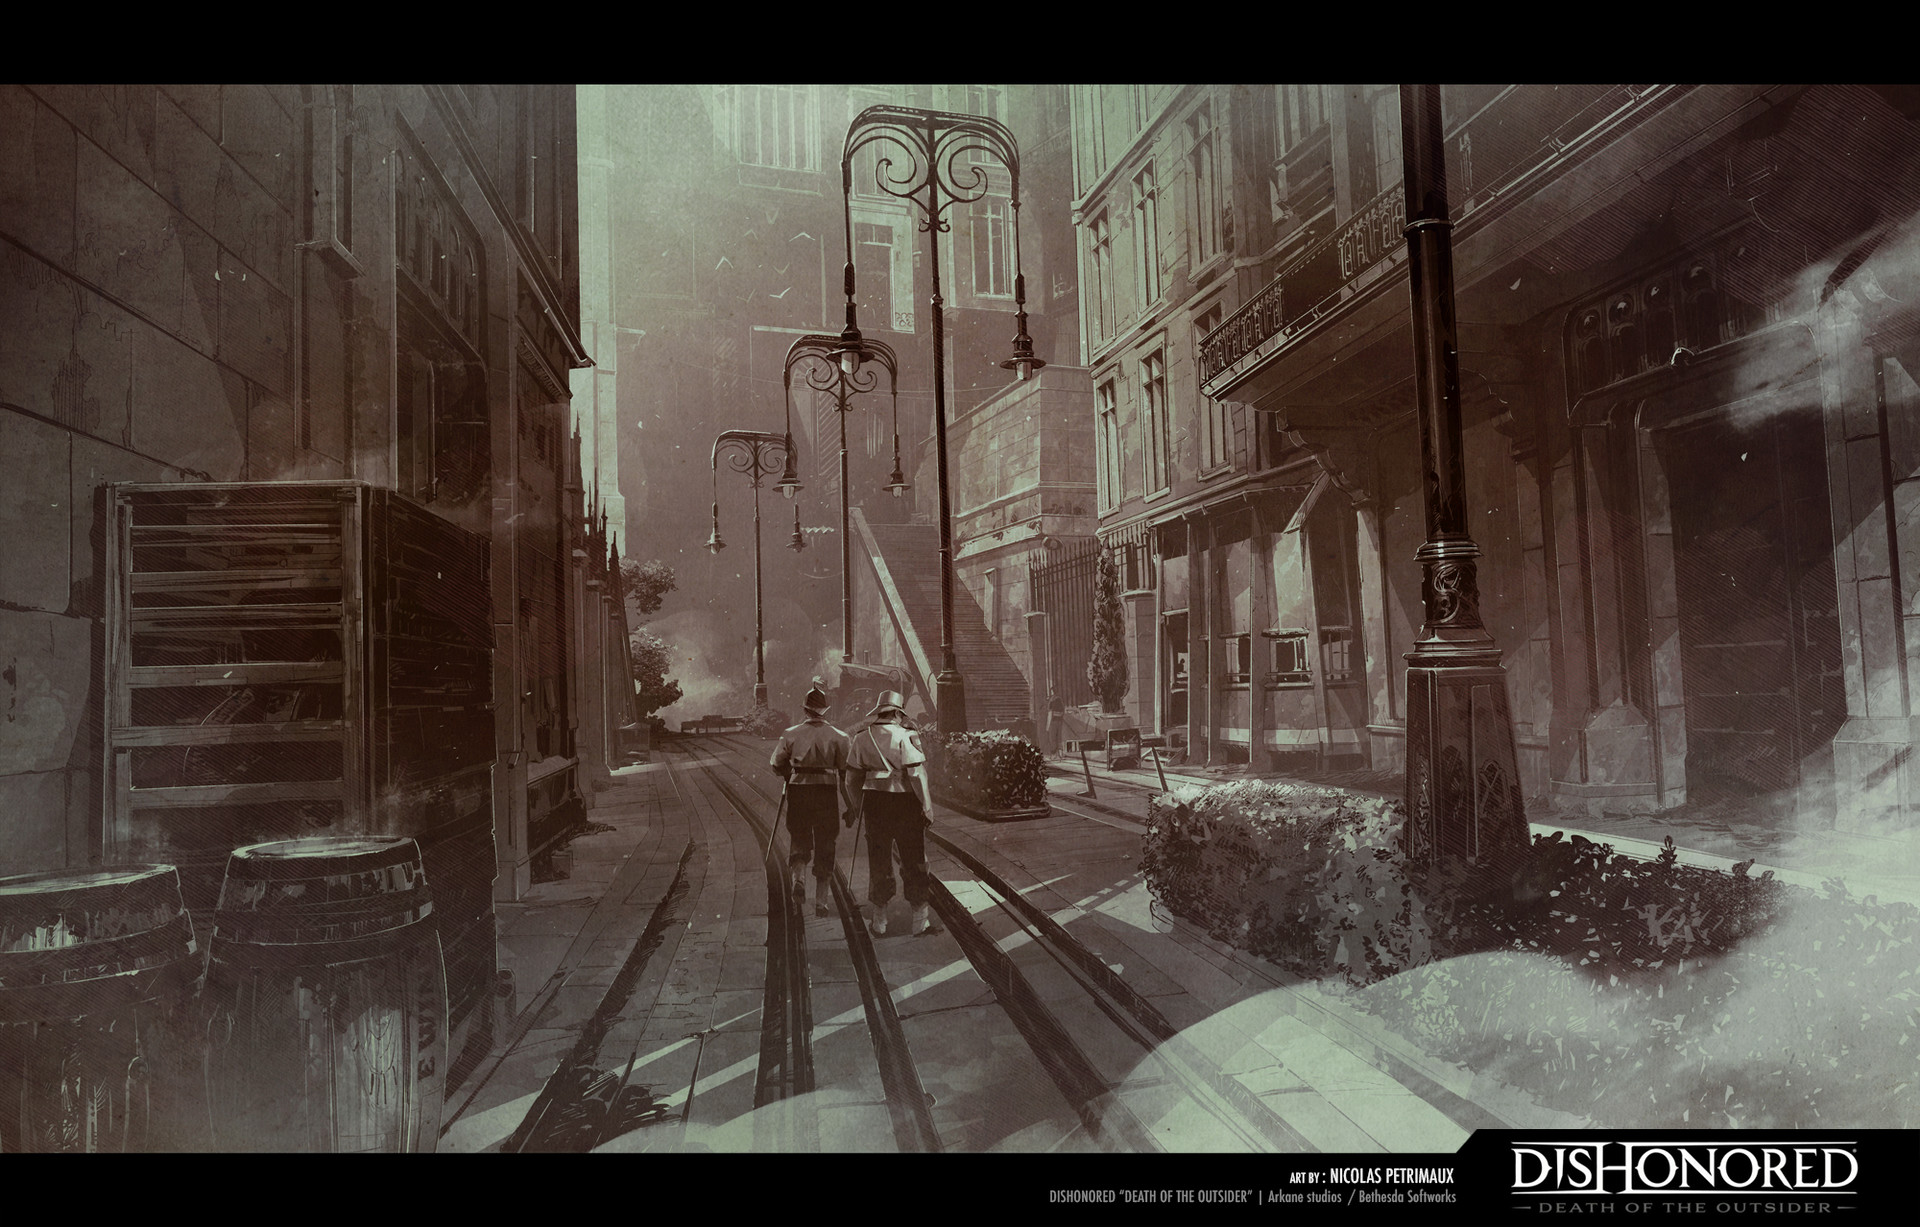 Fine Art: The Art Of Dishonored 2: Death Of The Outsider